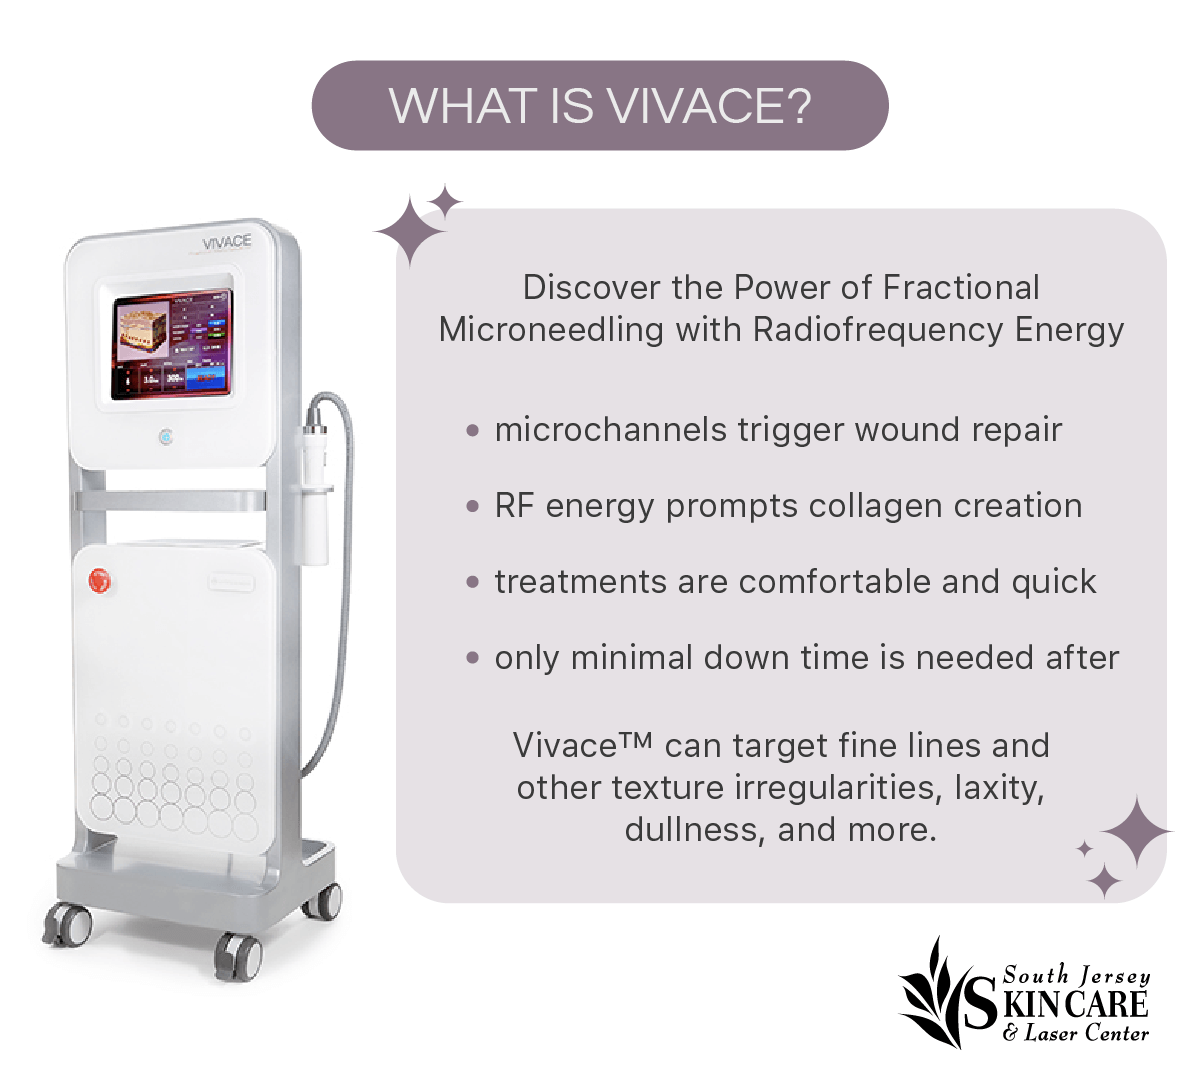 Learn the benefits of Vivace™ at New Jersey’s South Jersey Skin Care & Laser Center.